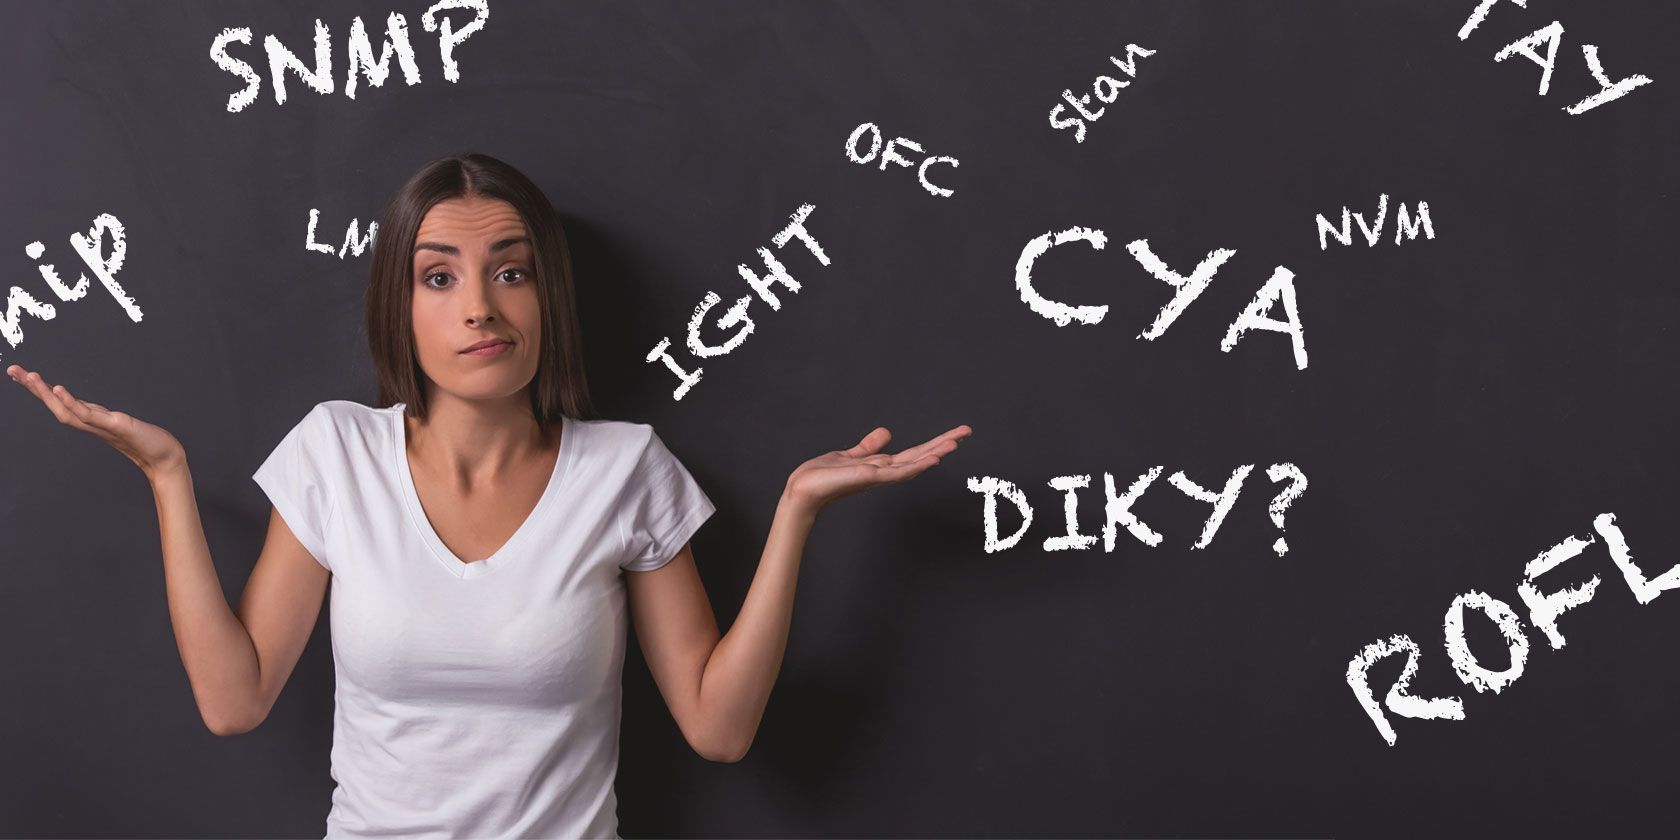 30 More Slang Words and Acronyms You Need to Know